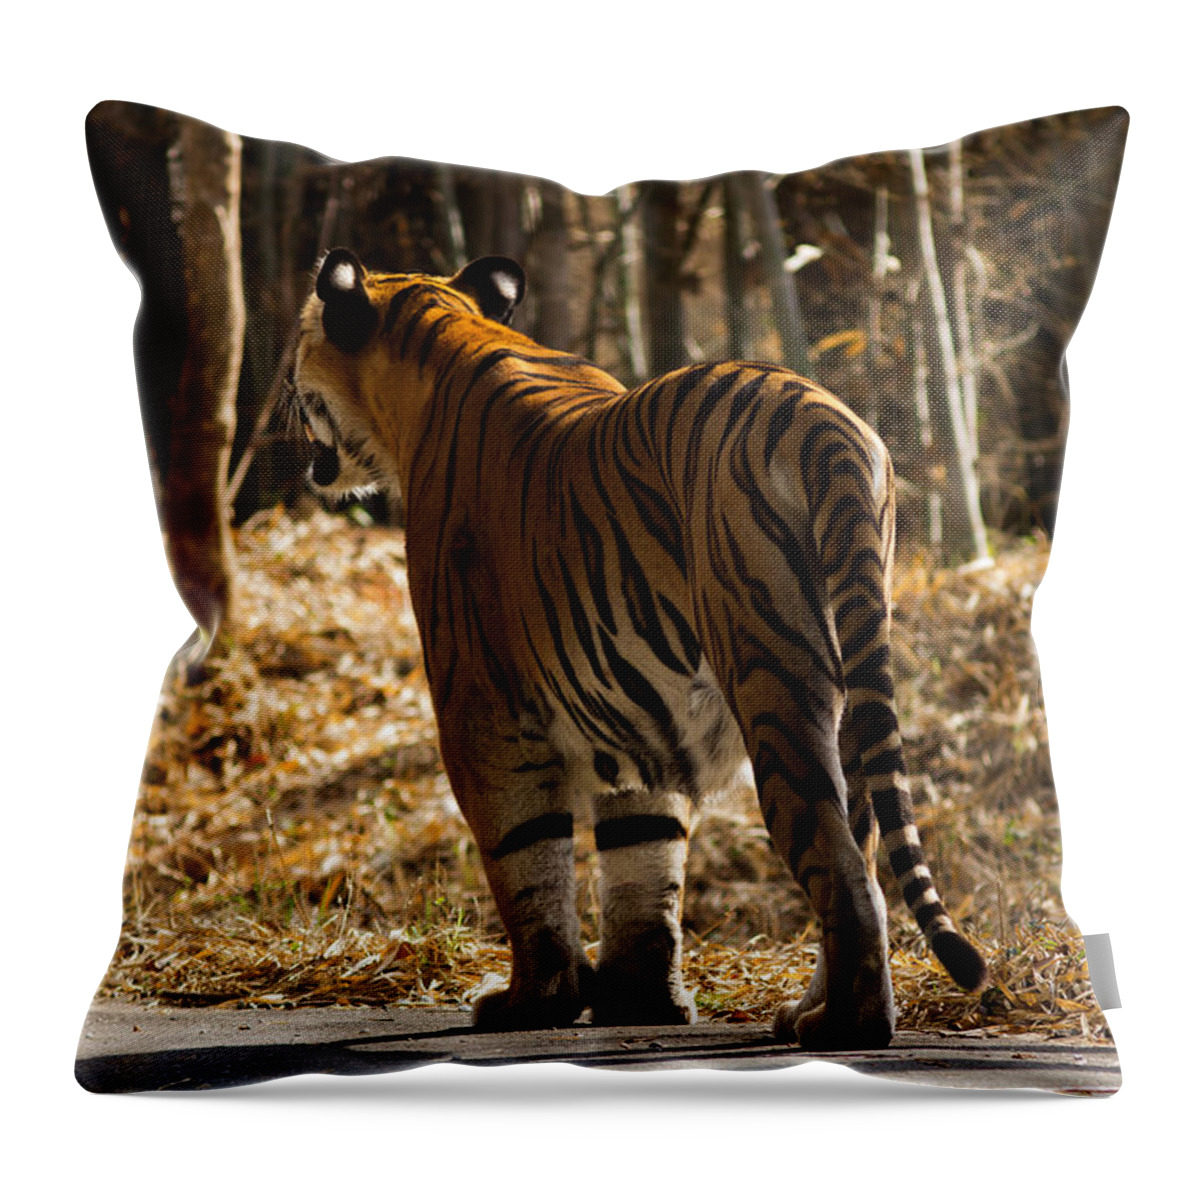 Tiger Throw Pillow featuring the photograph Focused by Ramabhadran Thirupattur